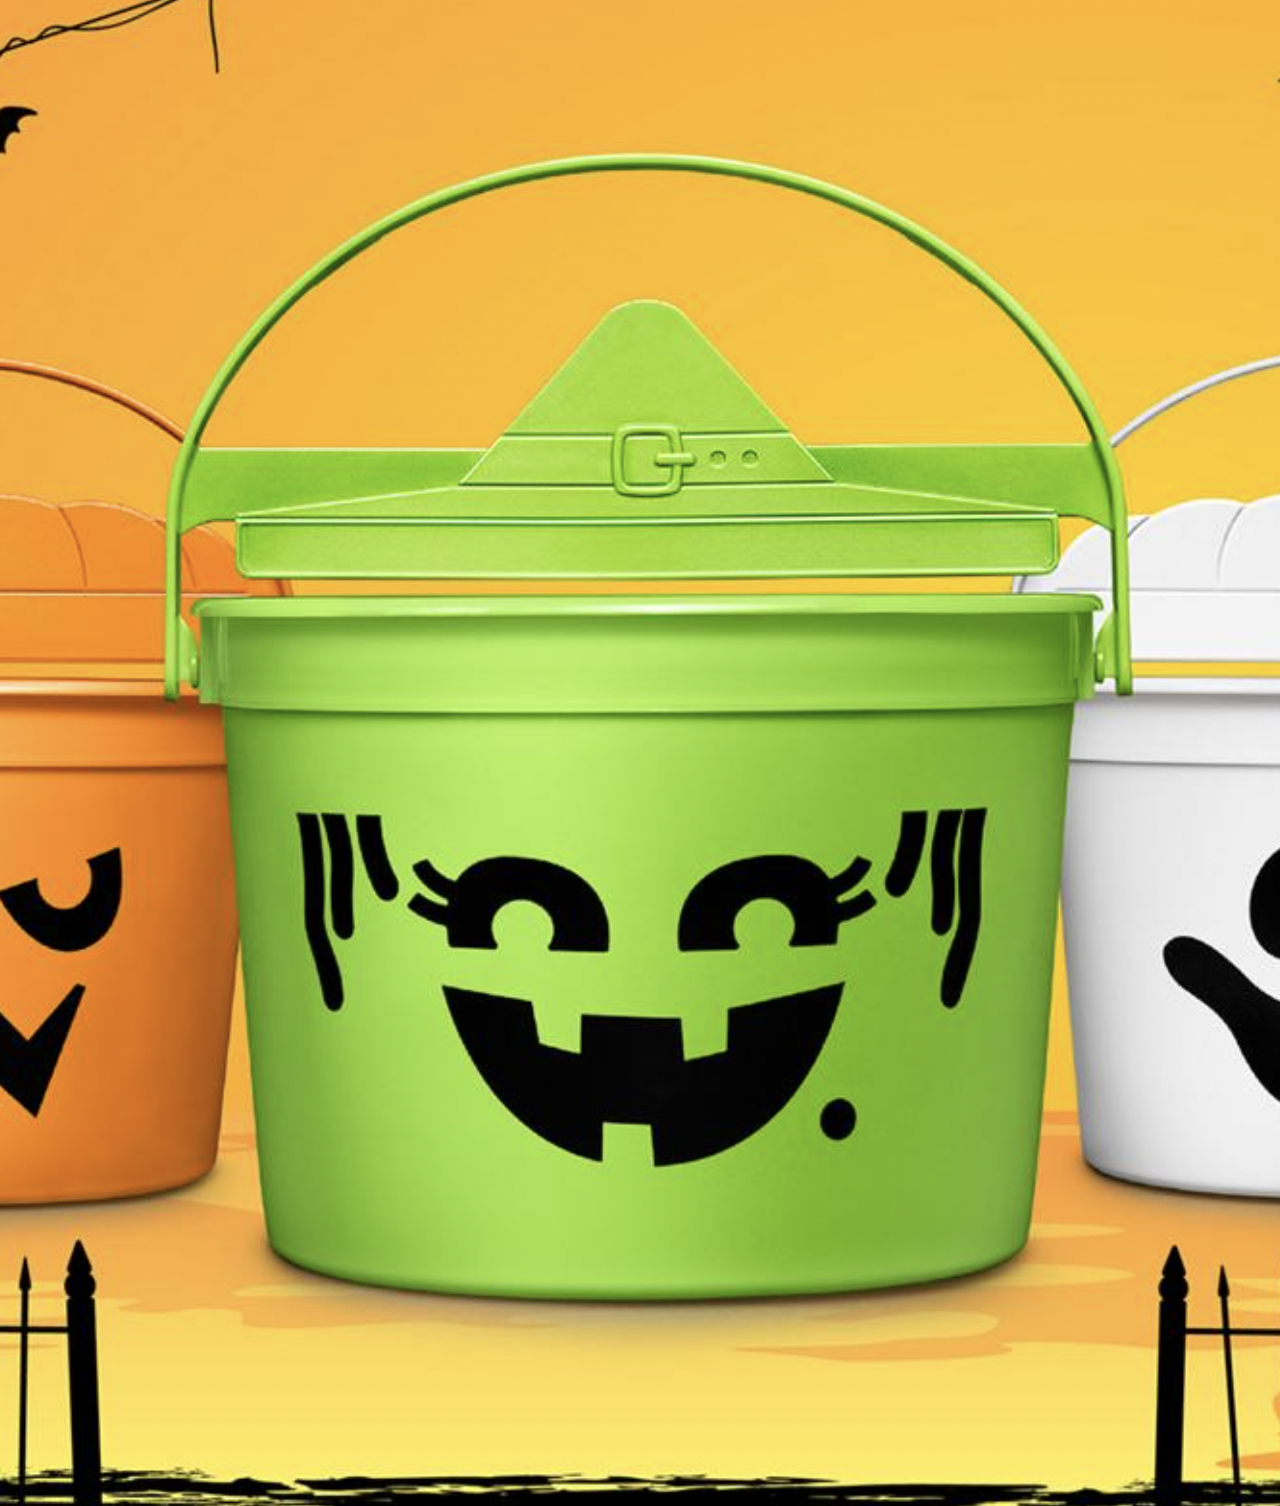 They’re BACK! The McDonald’s Iconic Halloween Pails of your childhood have returned through 10/31